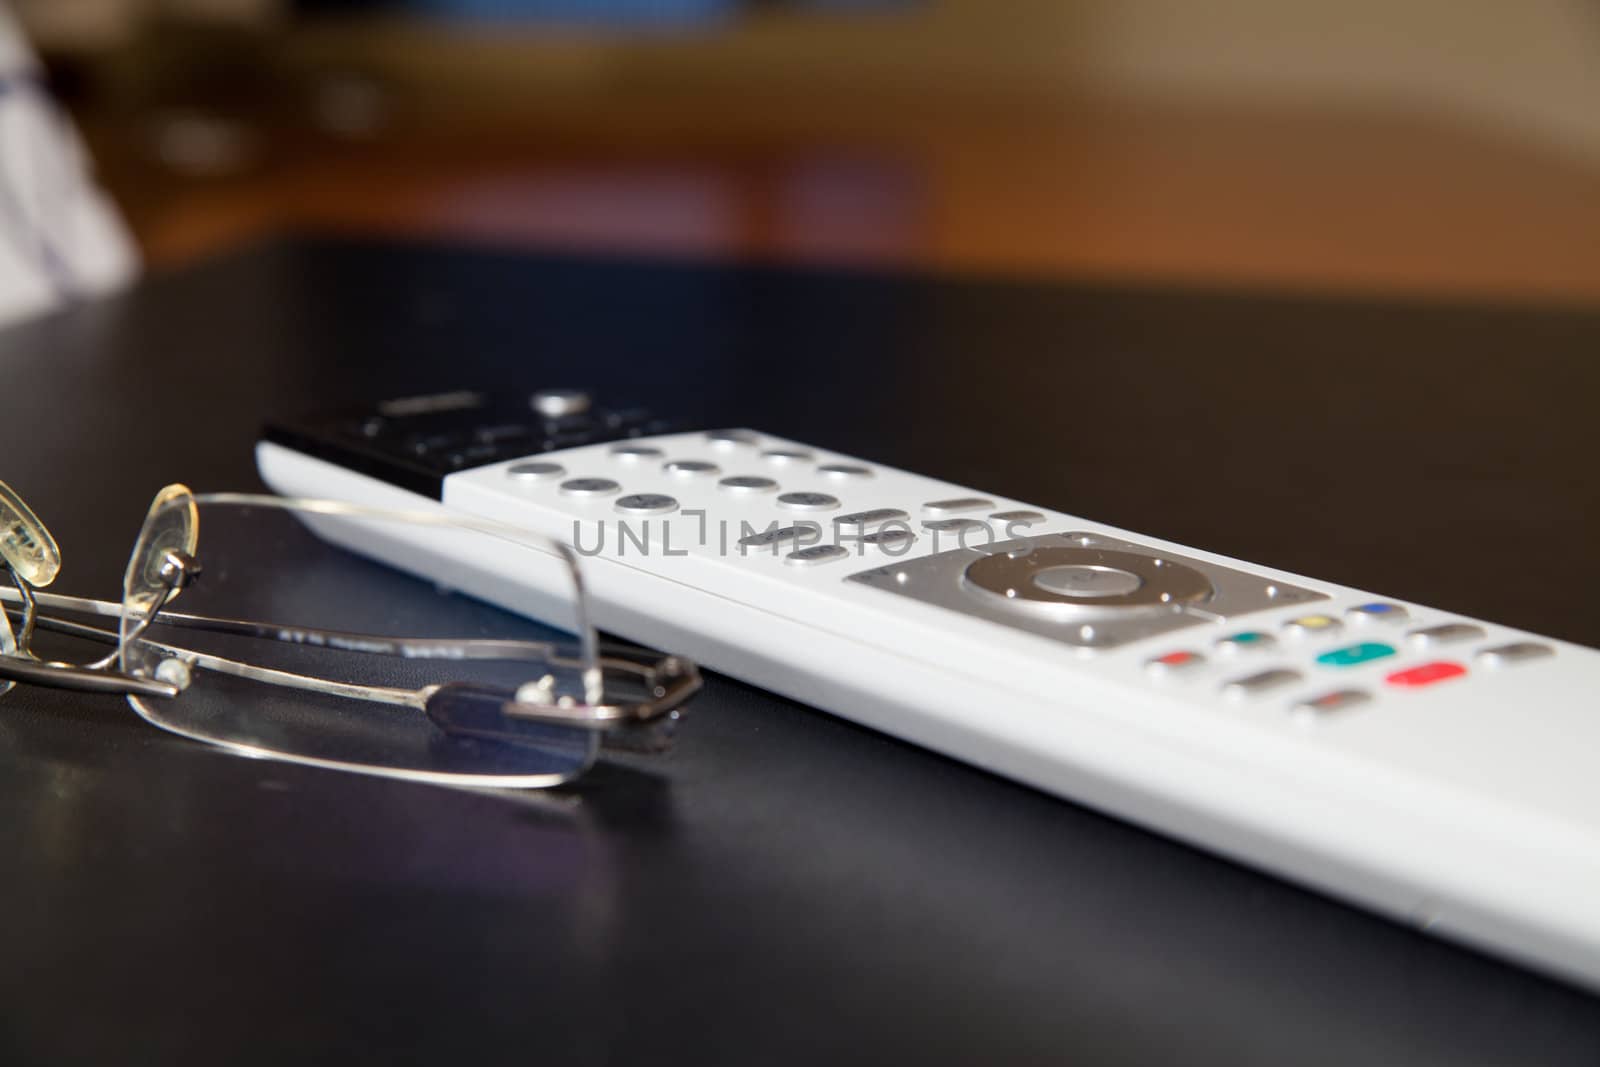 TV remote controller and glasses on the table
